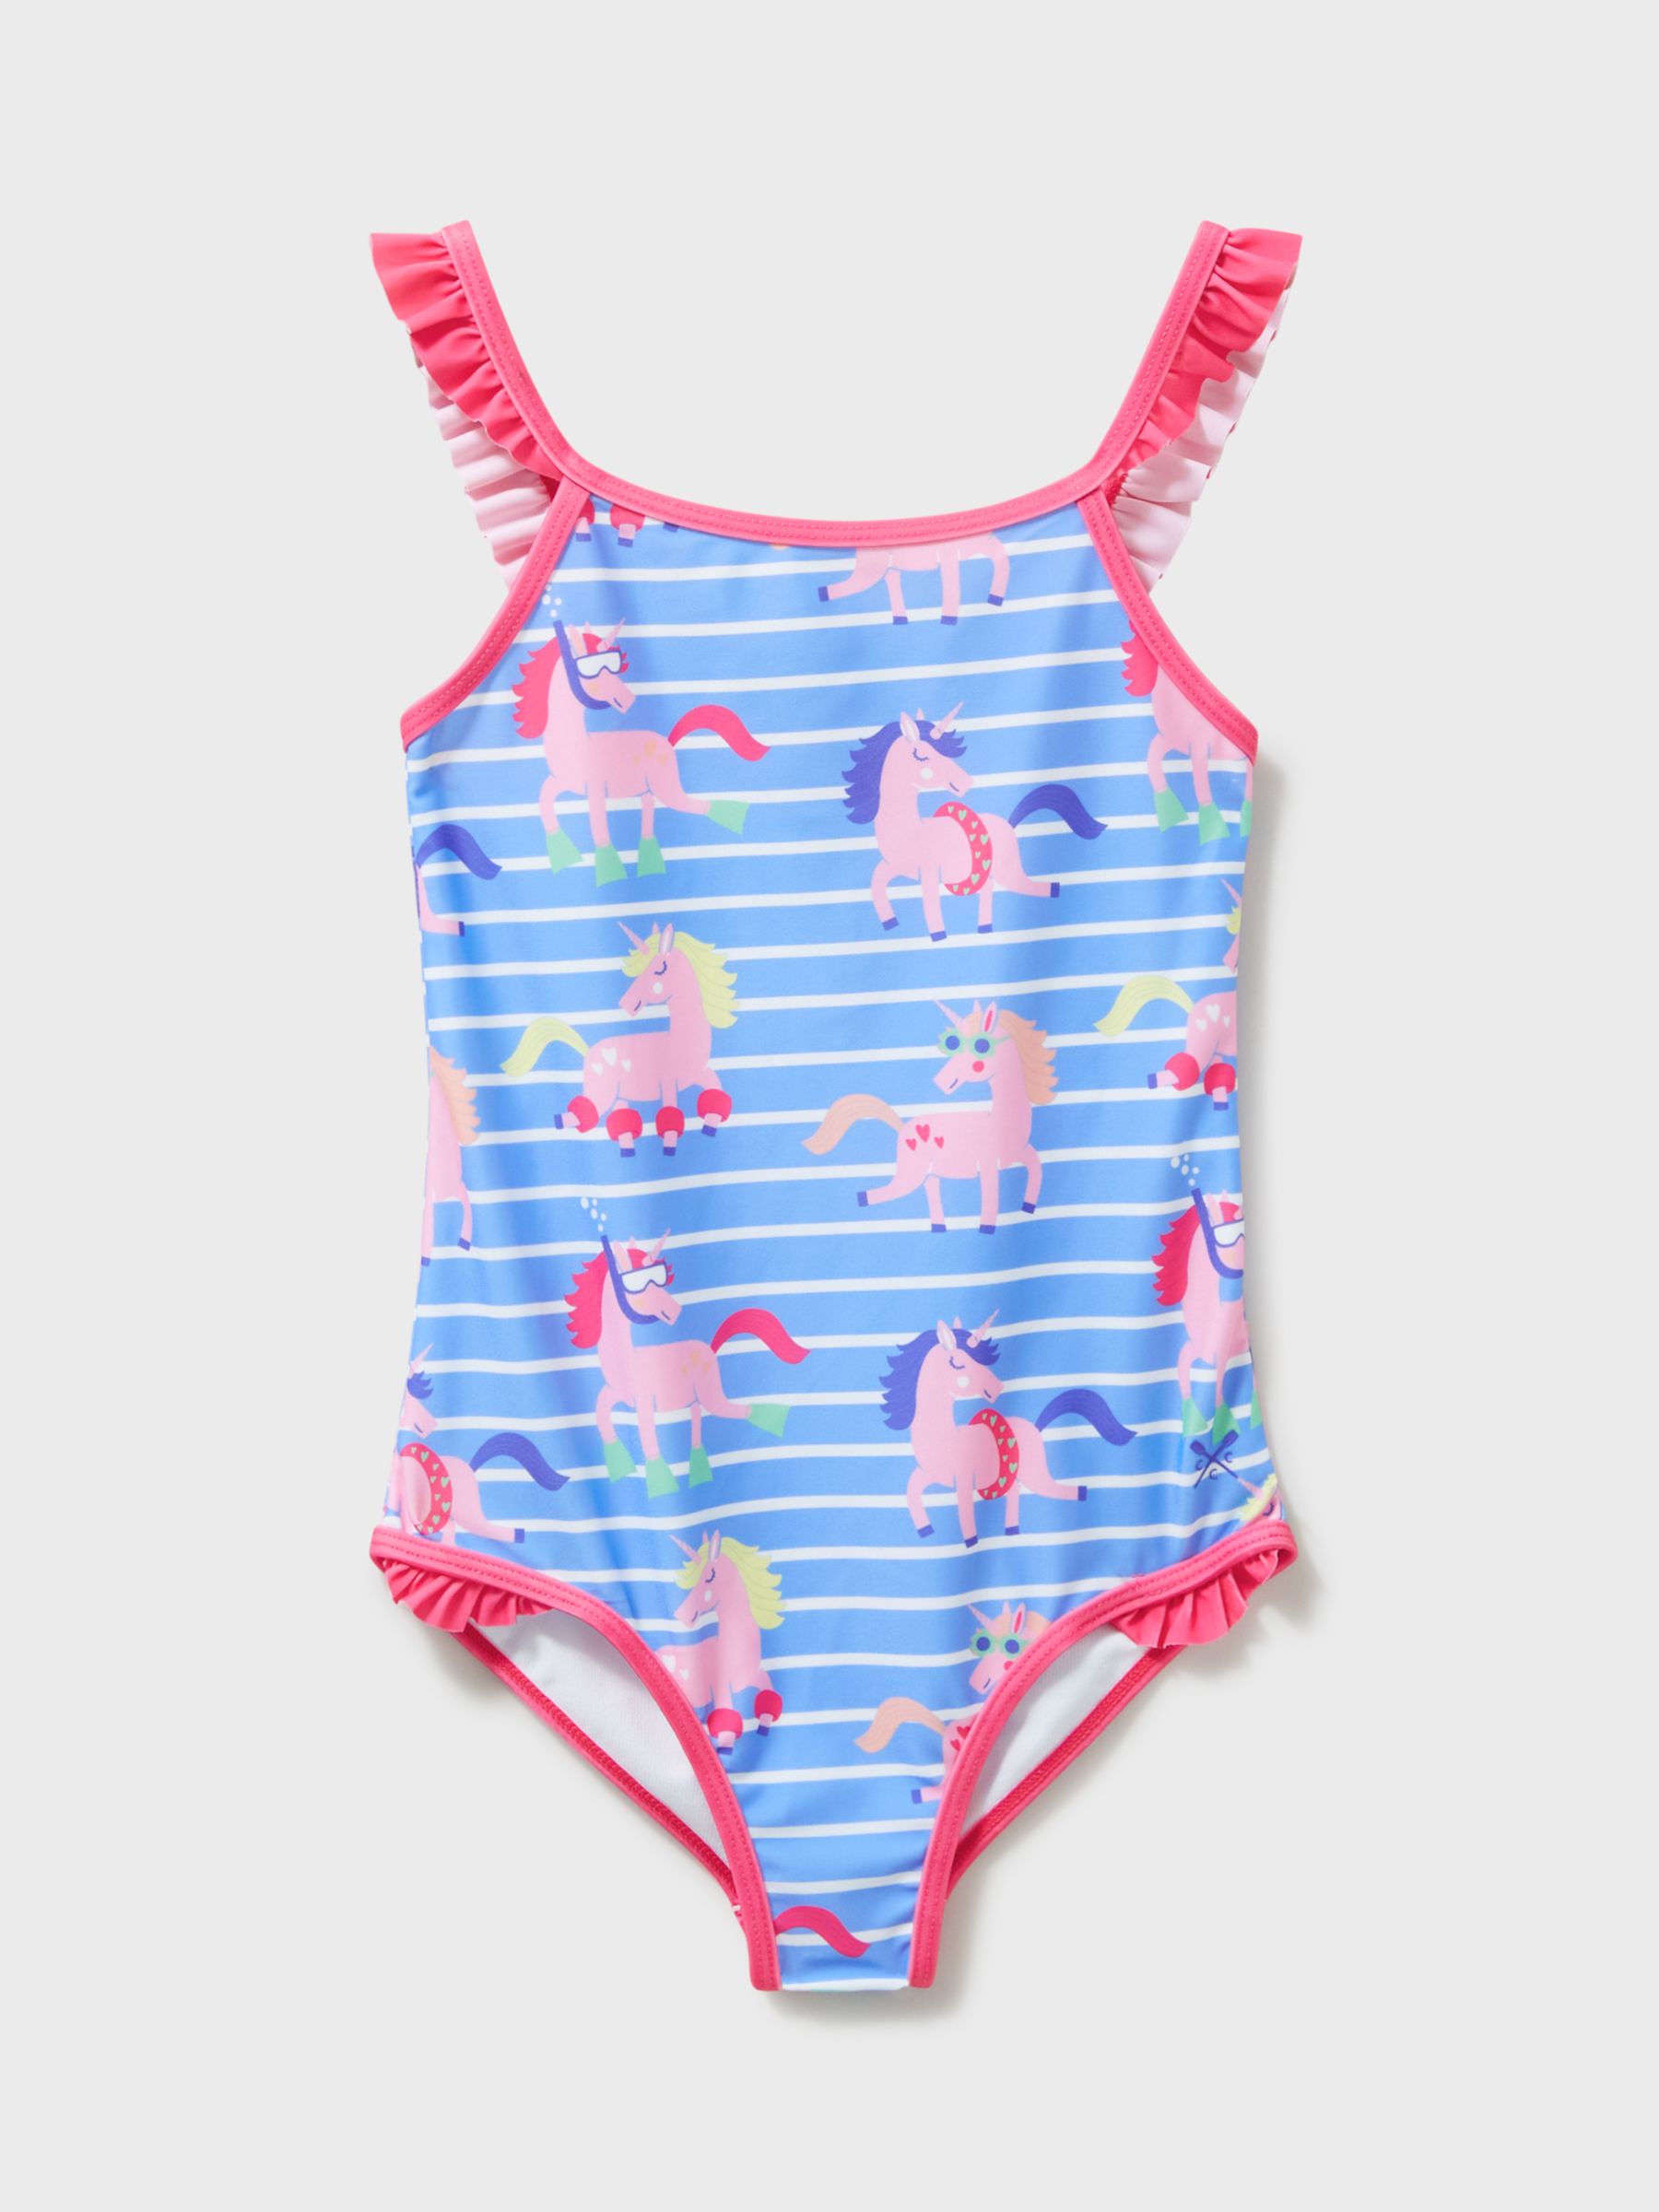 Types of Childrens Swimming Costumes